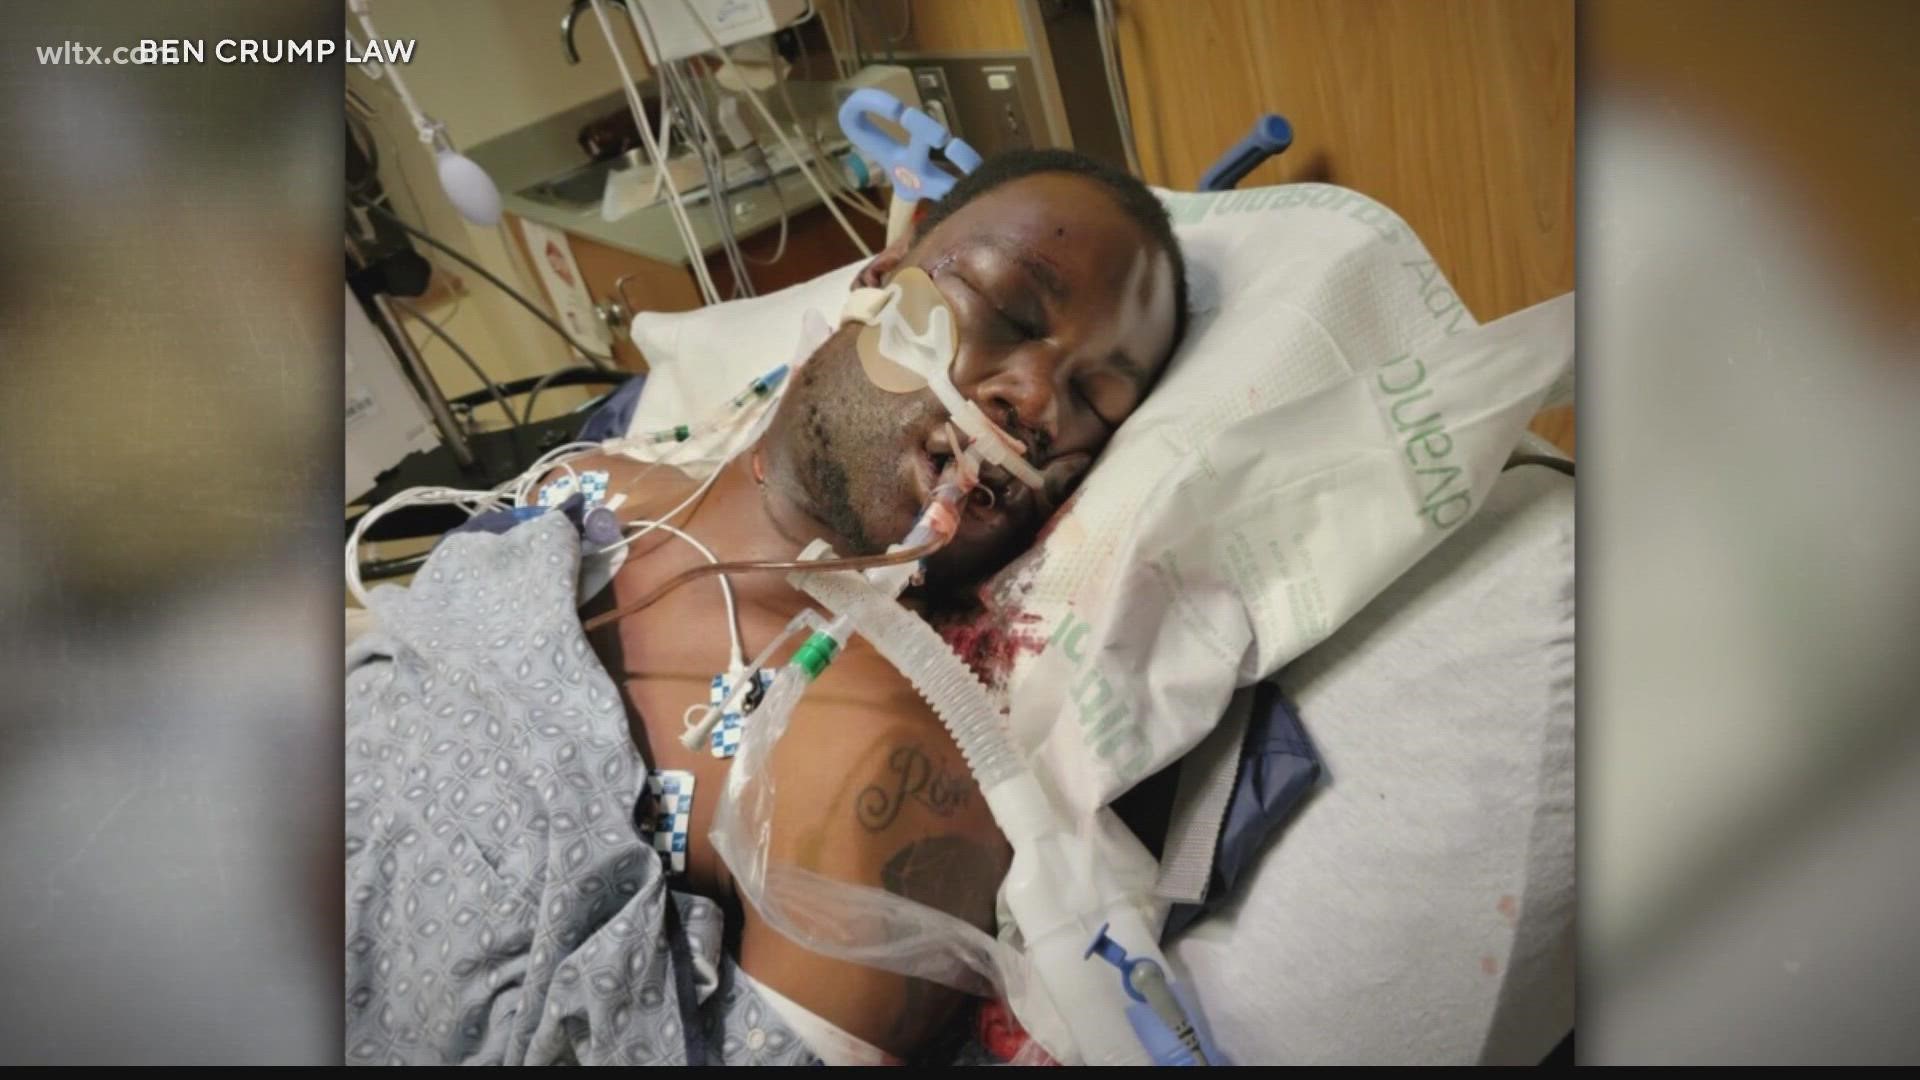 Memphis police officers beat motorist Tyre Nichols for three minutes, attorneys for the family said Monday.